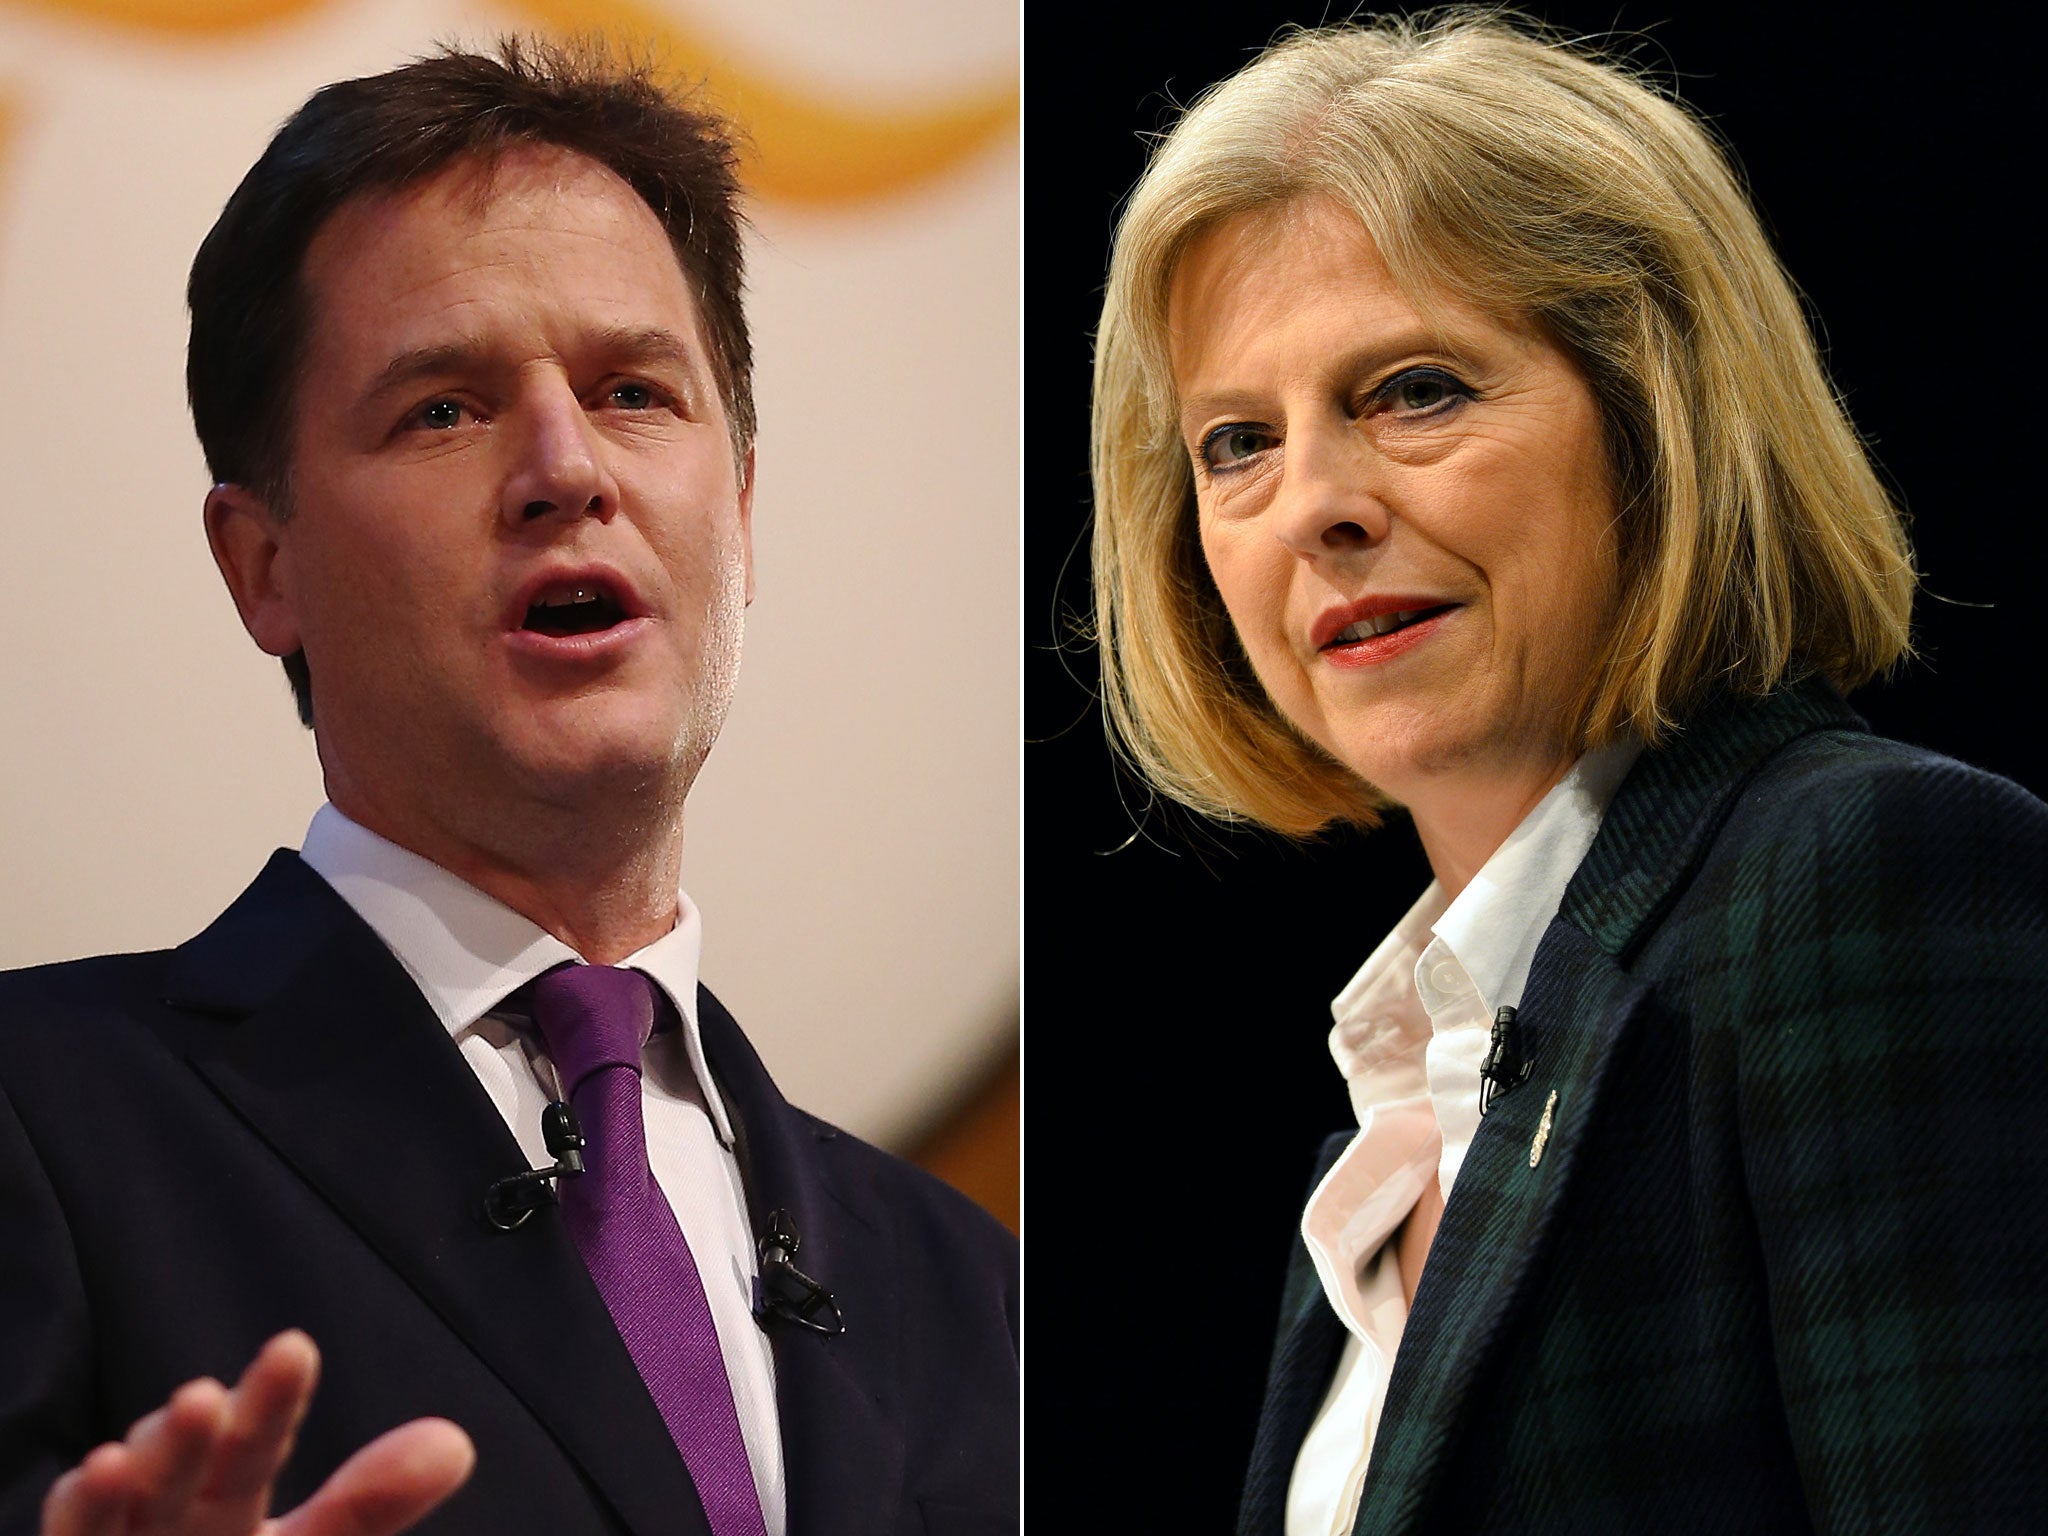 Nick Clegg has accused Theresa May of 'illegal' plans to limit EU migrants